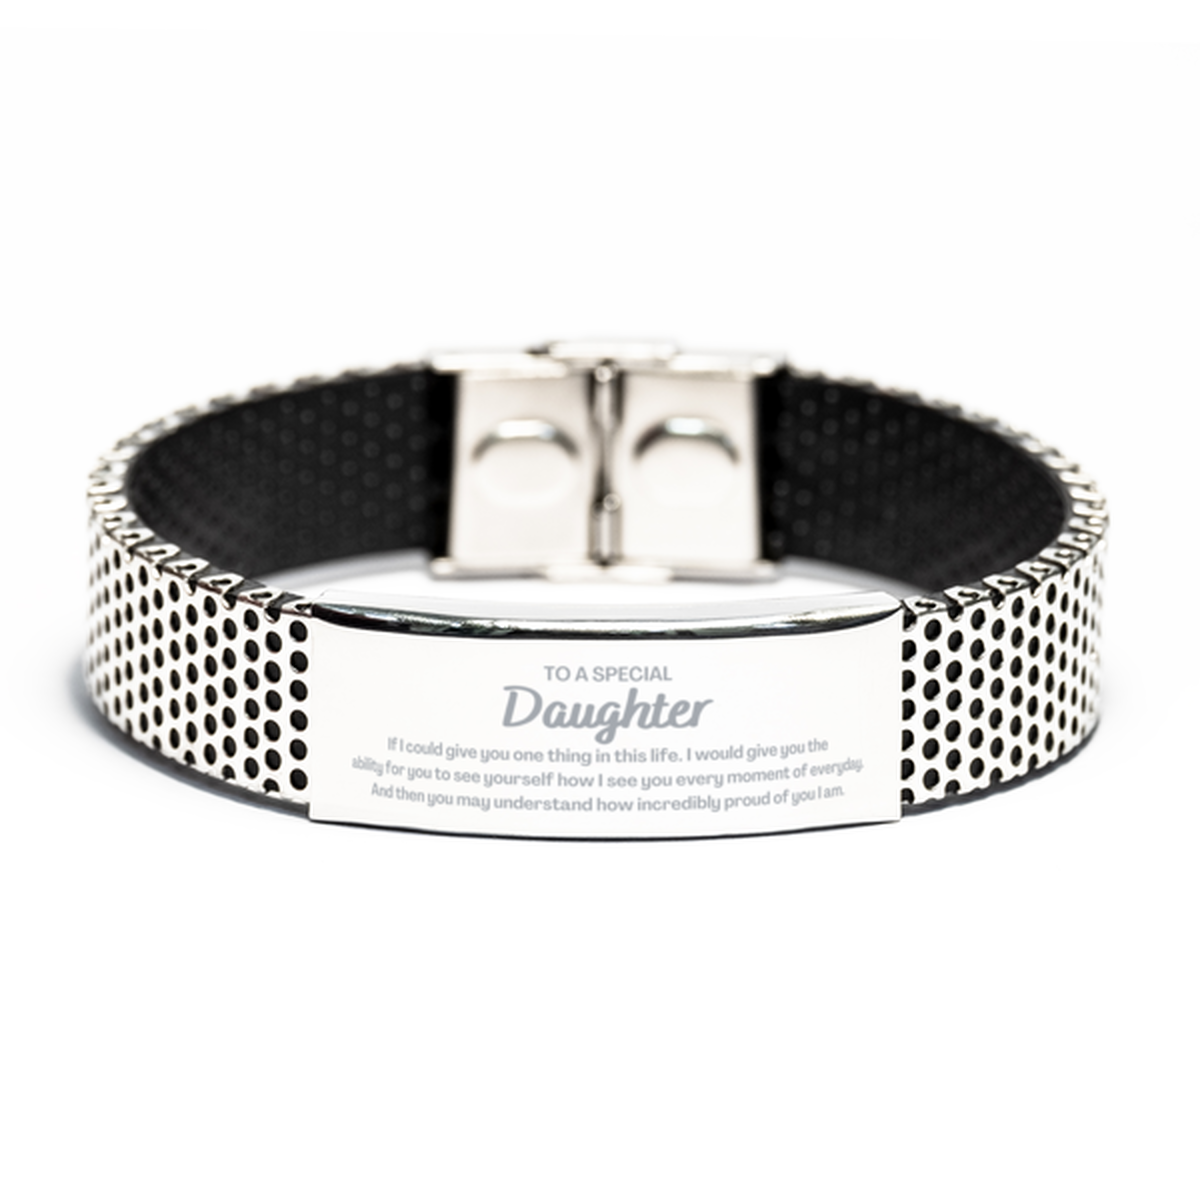 To My Daughter Stainless Steel Bracelet, Gifts For Daughter Engraved, Inspirational Gifts for Christmas Birthday, Epic Gifts for Daughter To A Special Daughter how incredibly proud of you I am